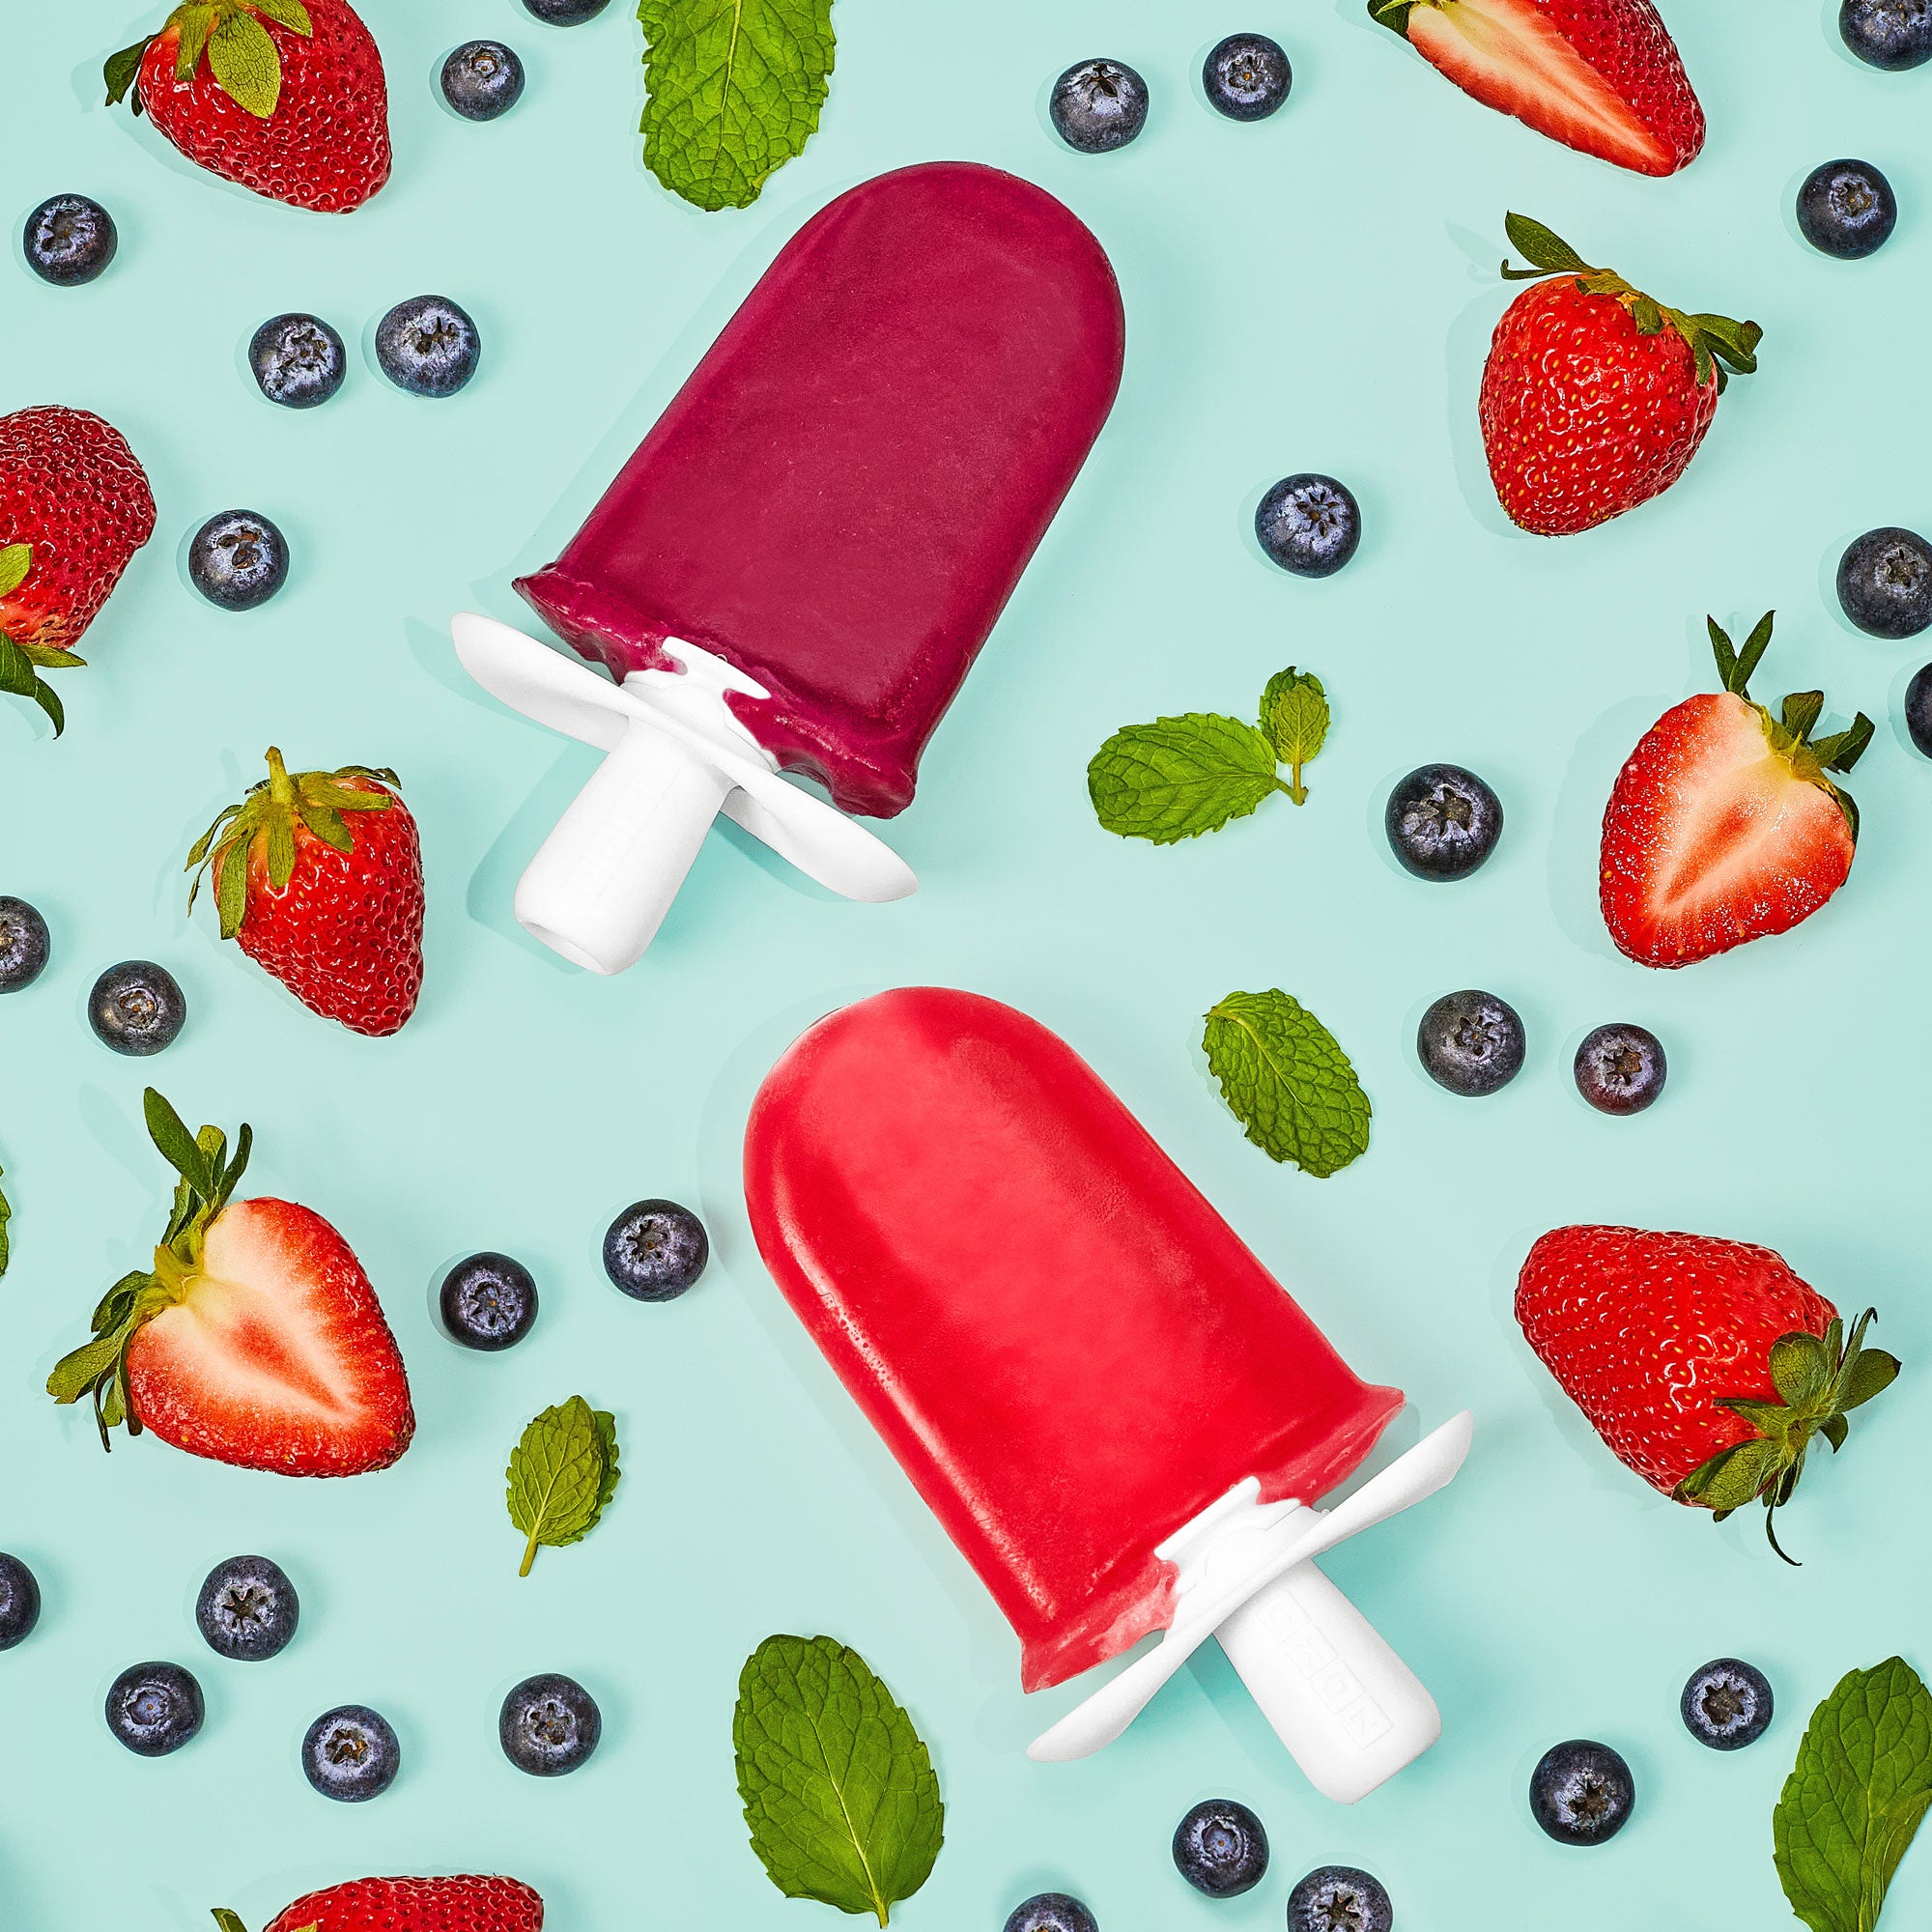 Top Tips on How to Create Eco-Friendly Frozen Treats